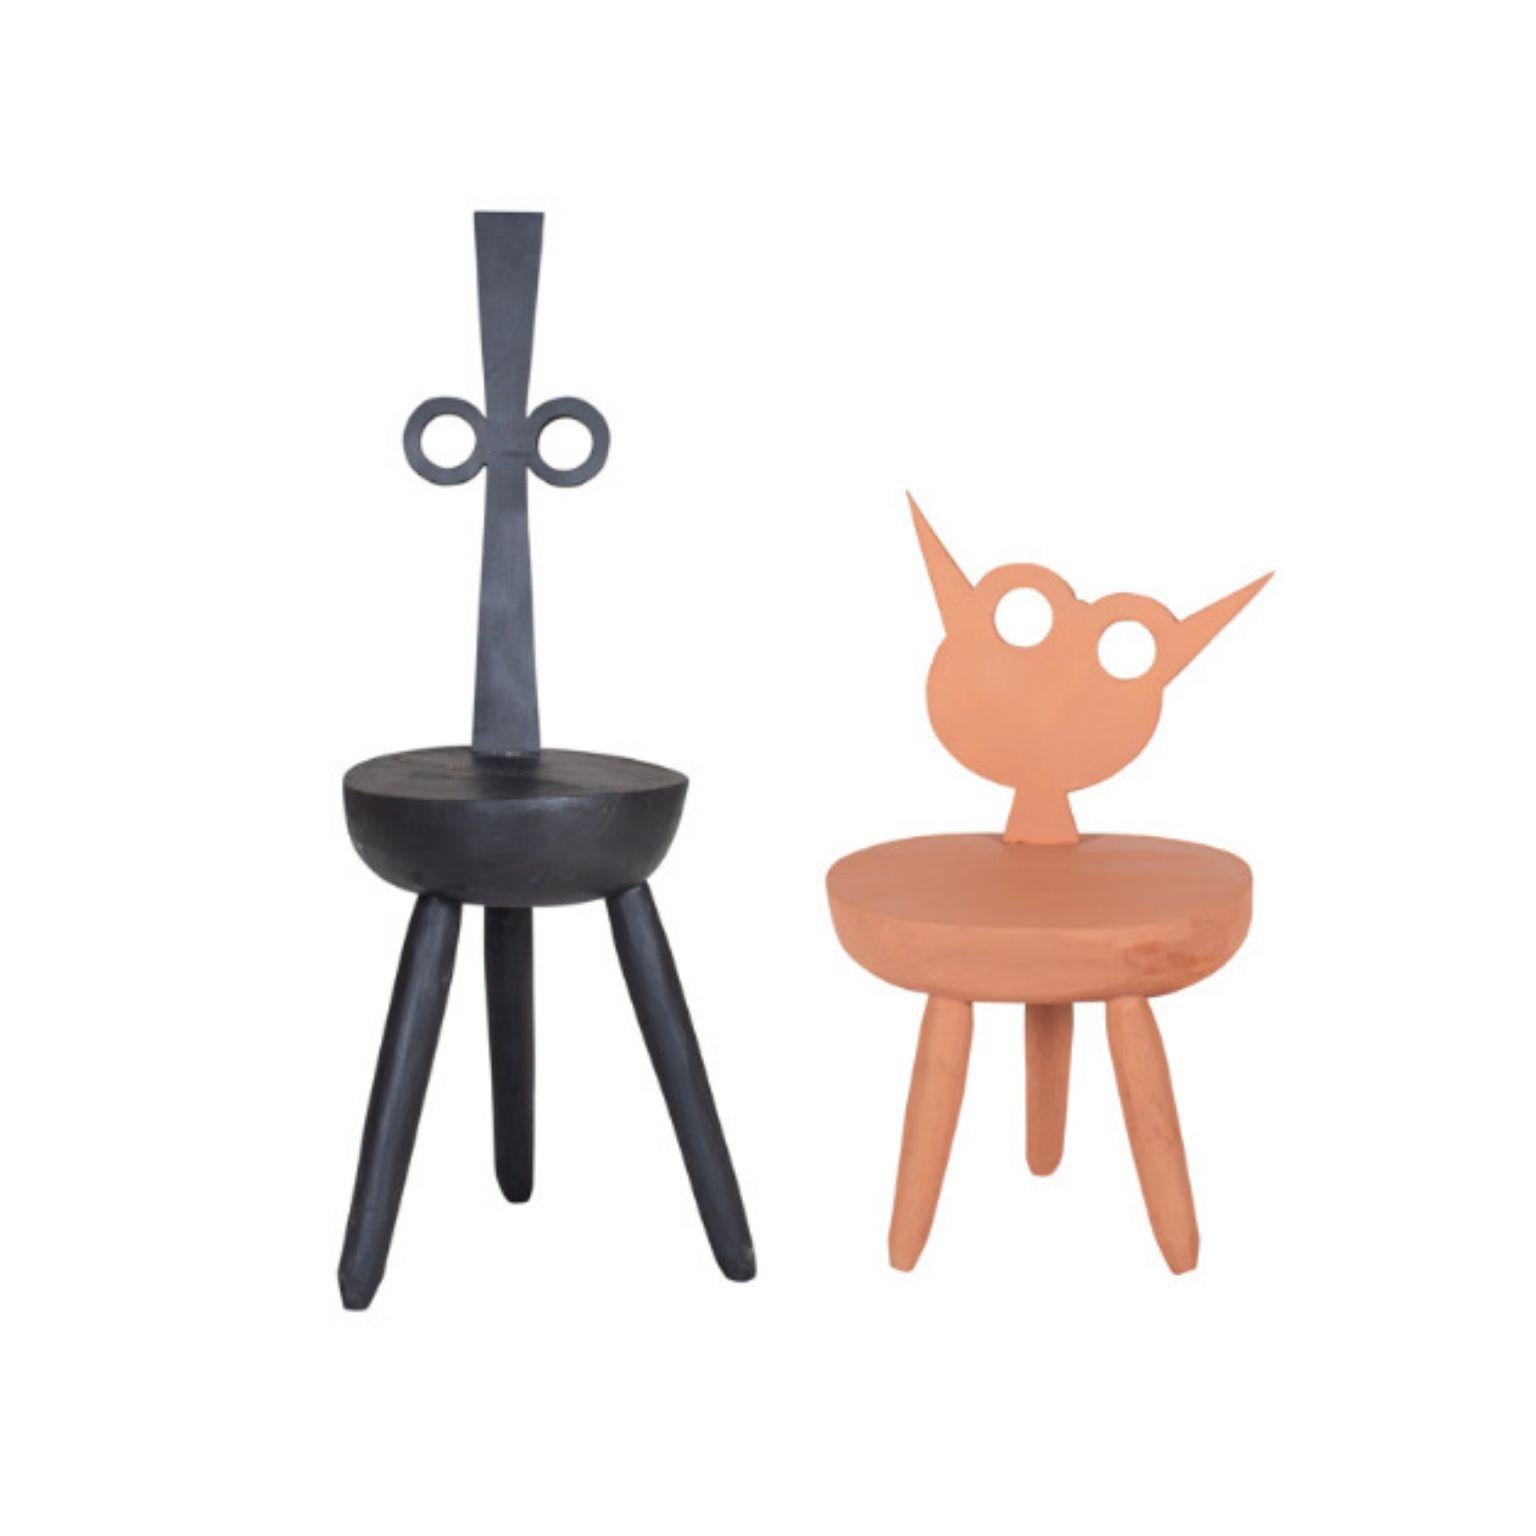 Set of 2 Rose Flora and Black Gomez Chair by Pulpo
Design by Vasilica lsacescu & Nadja Zerunian
Dimensions: 
Flora: L 37 x W 27 x H 59 cm.
Gomez: L 30 x W 30 x H 94 cm 
Materials: Wood.

Also available in different colours. 

Pulpo is a